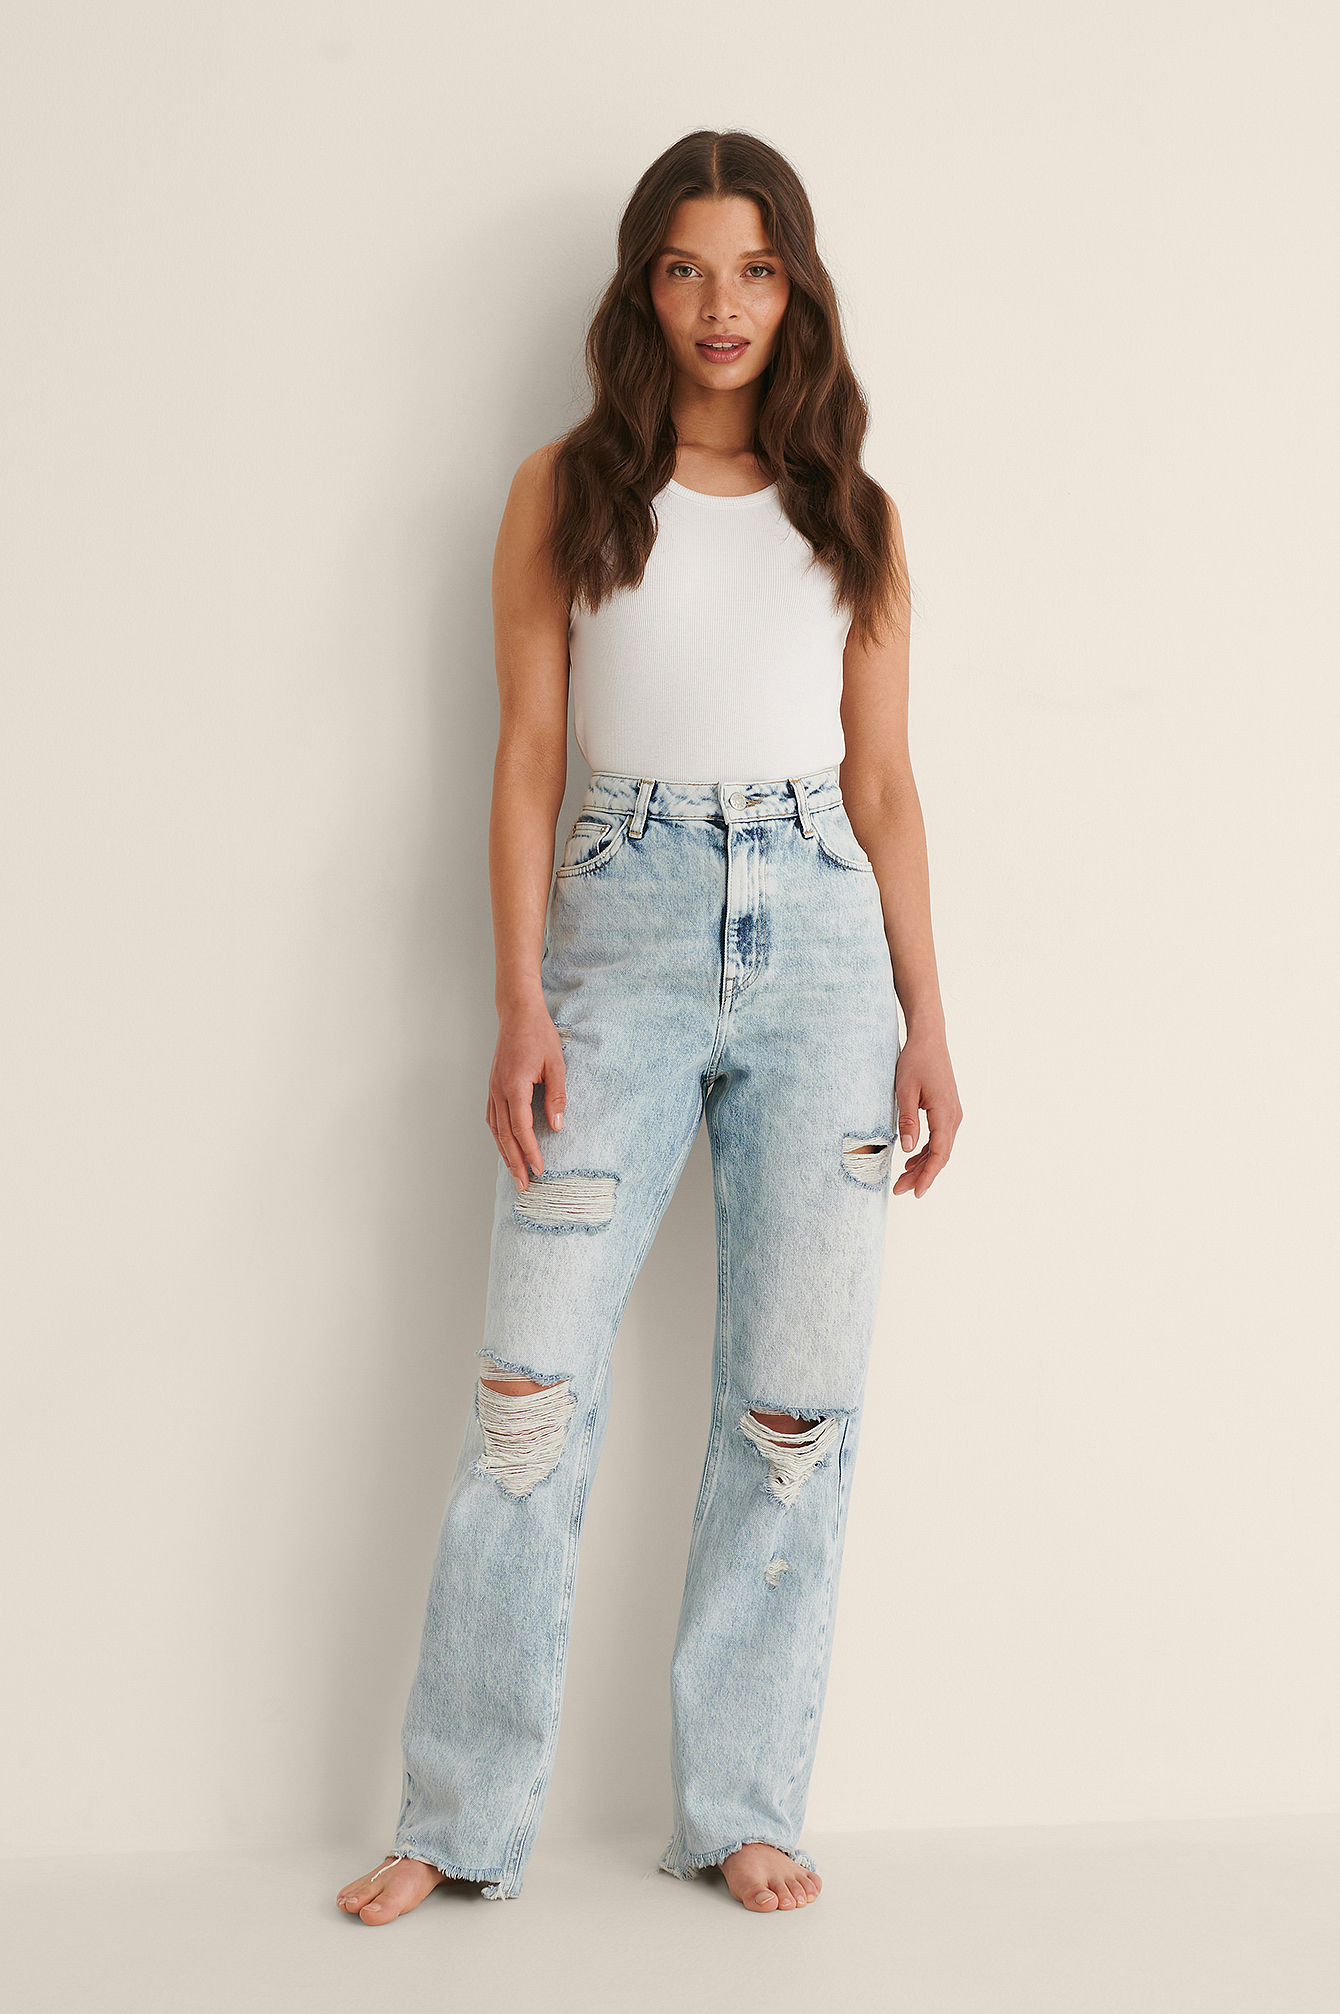 Destroyed High Waist Jeans Outfit.